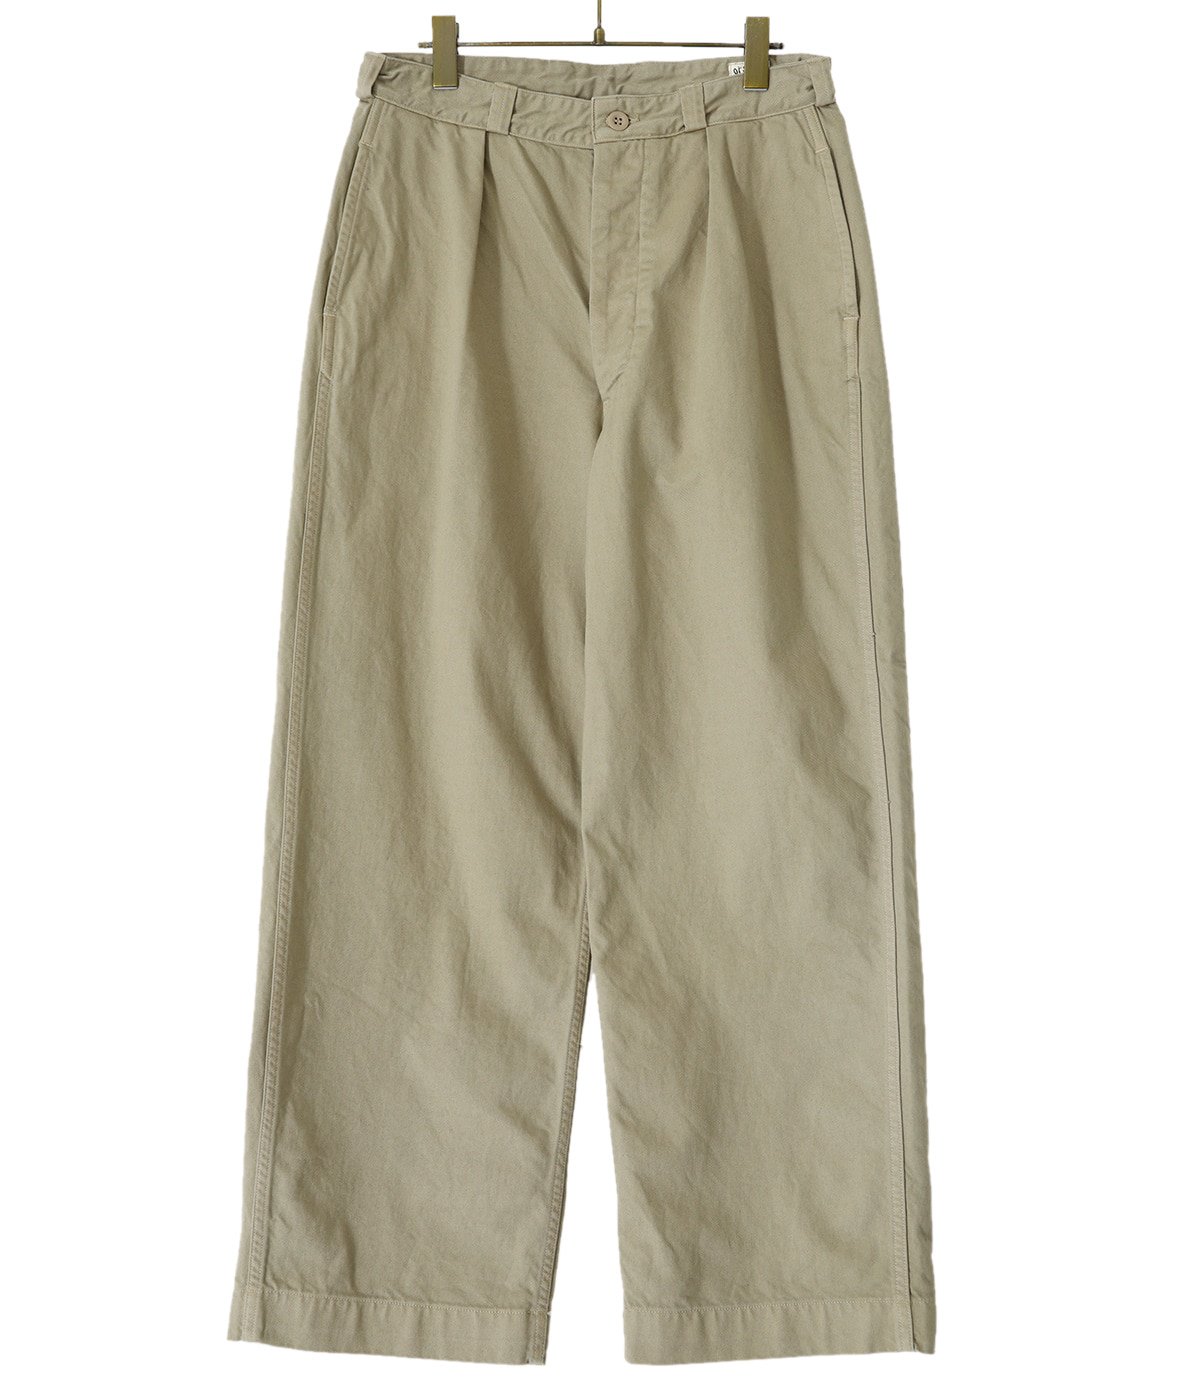 M-52 FRENCH ARMY TROUSER (WIDE FIT)